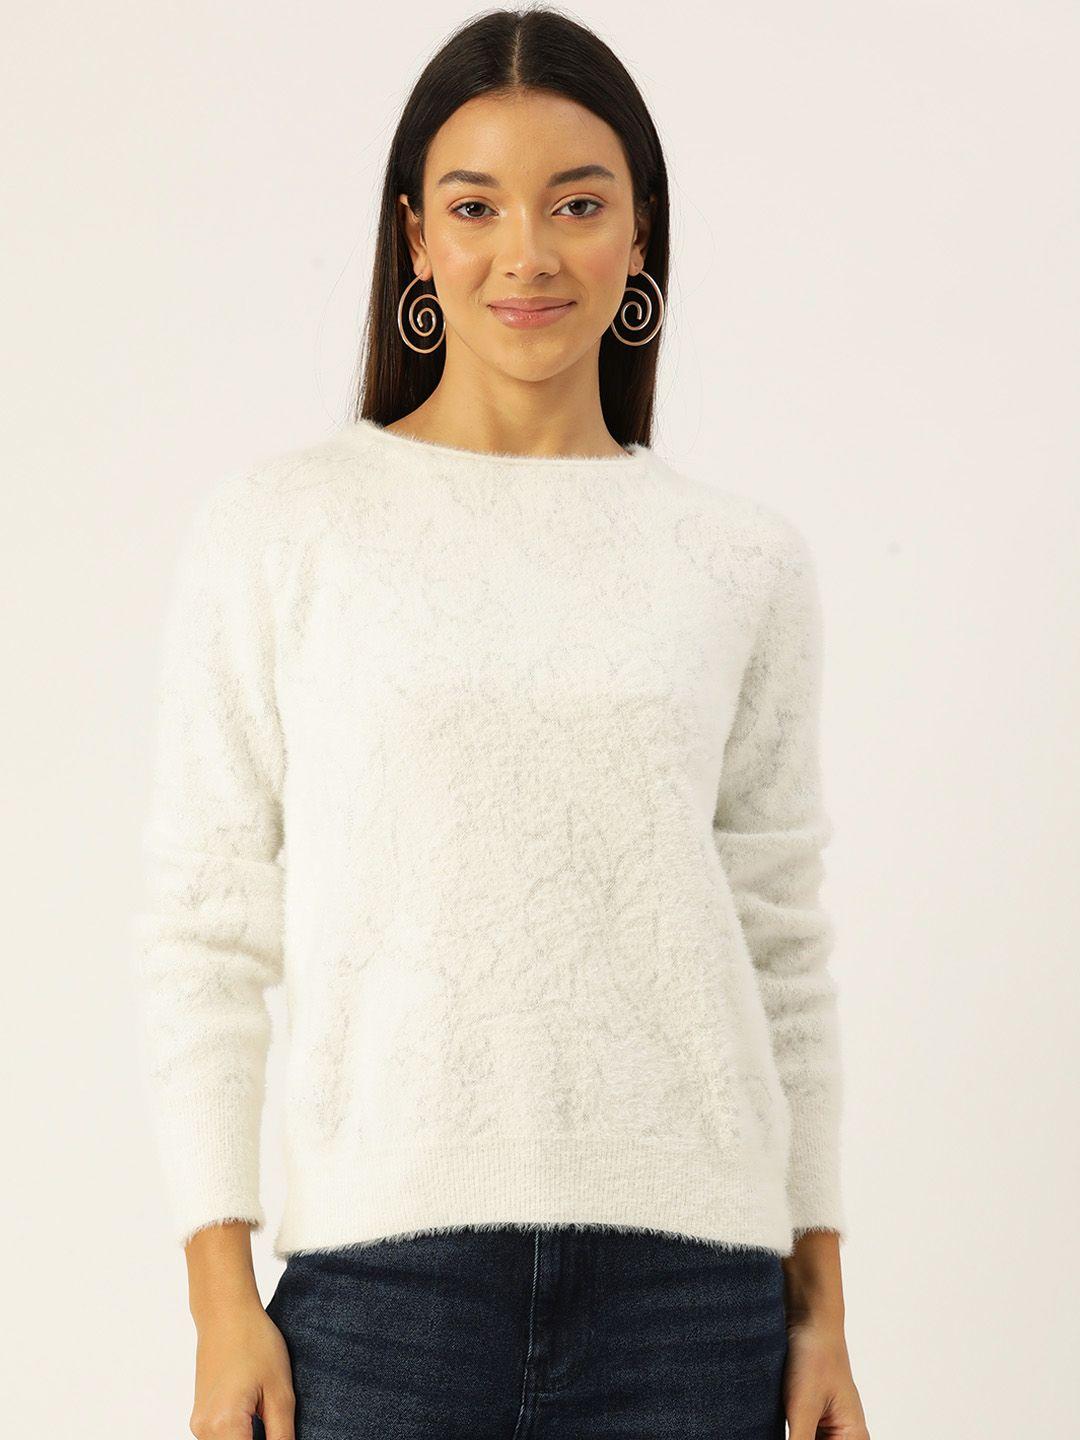 madame shimmery pullover with fuzzy detail